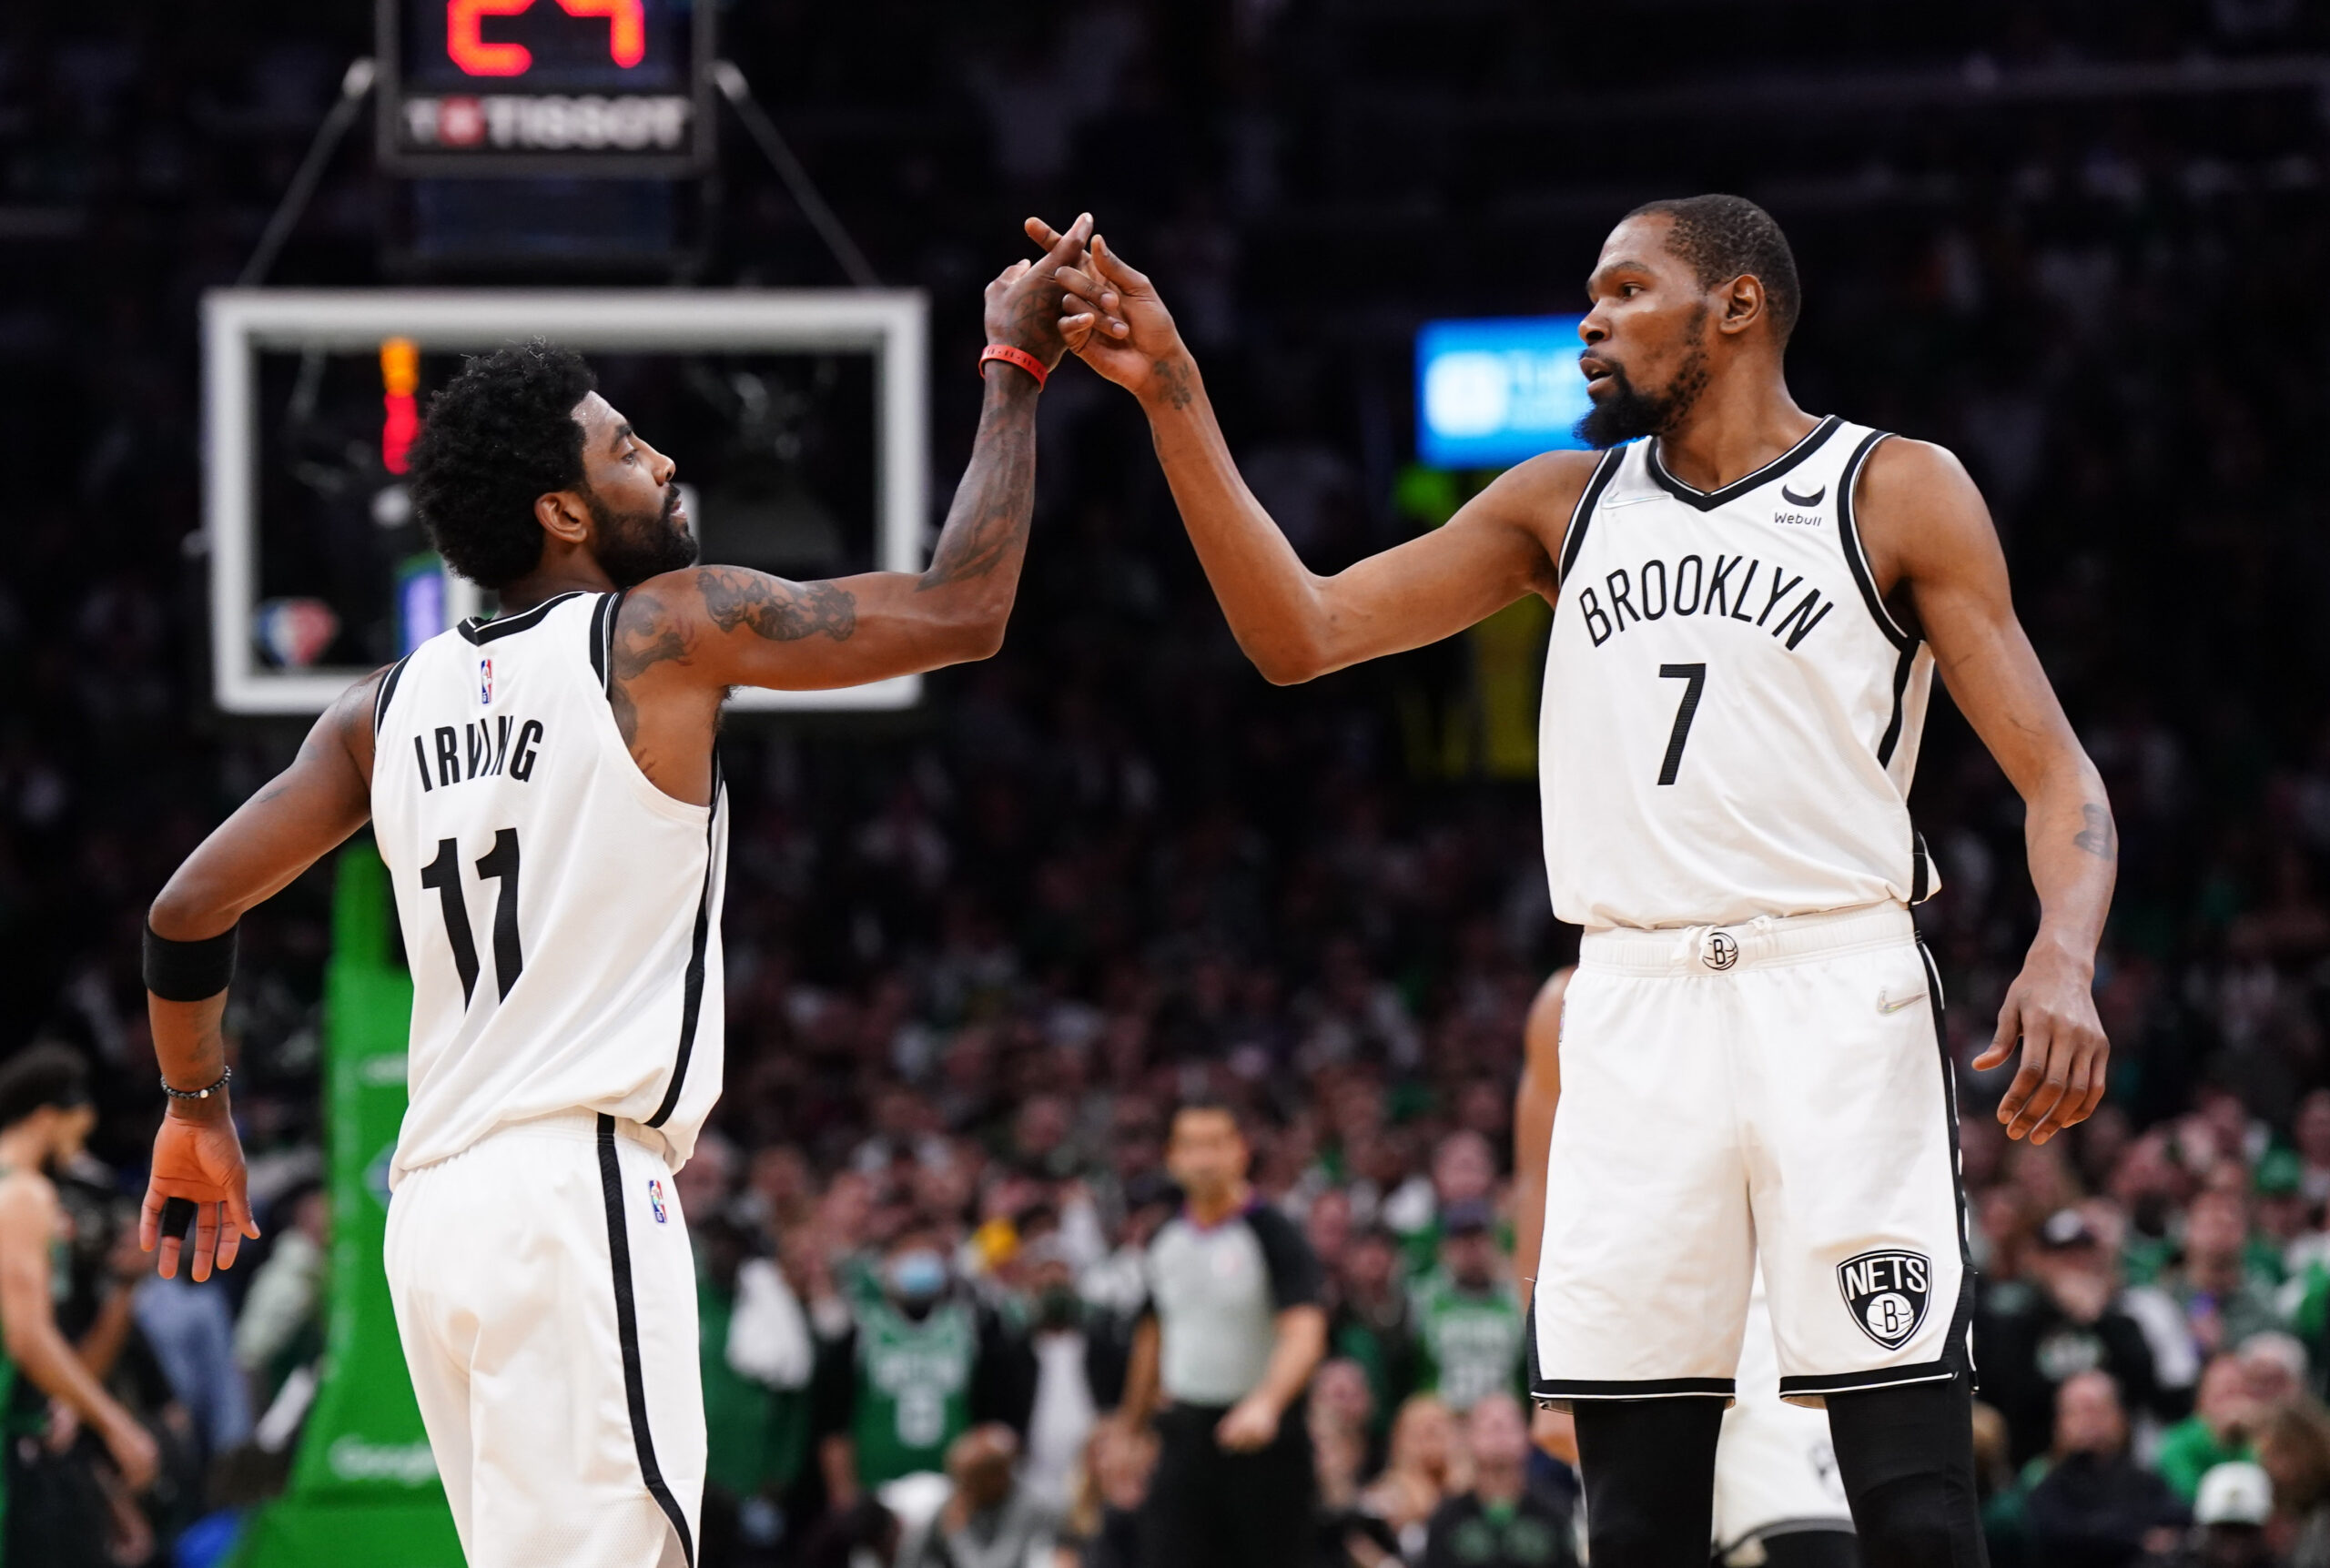 NBA rumors: What’s next for the Nets with Kevin Durant and Kyrie Irving returning?